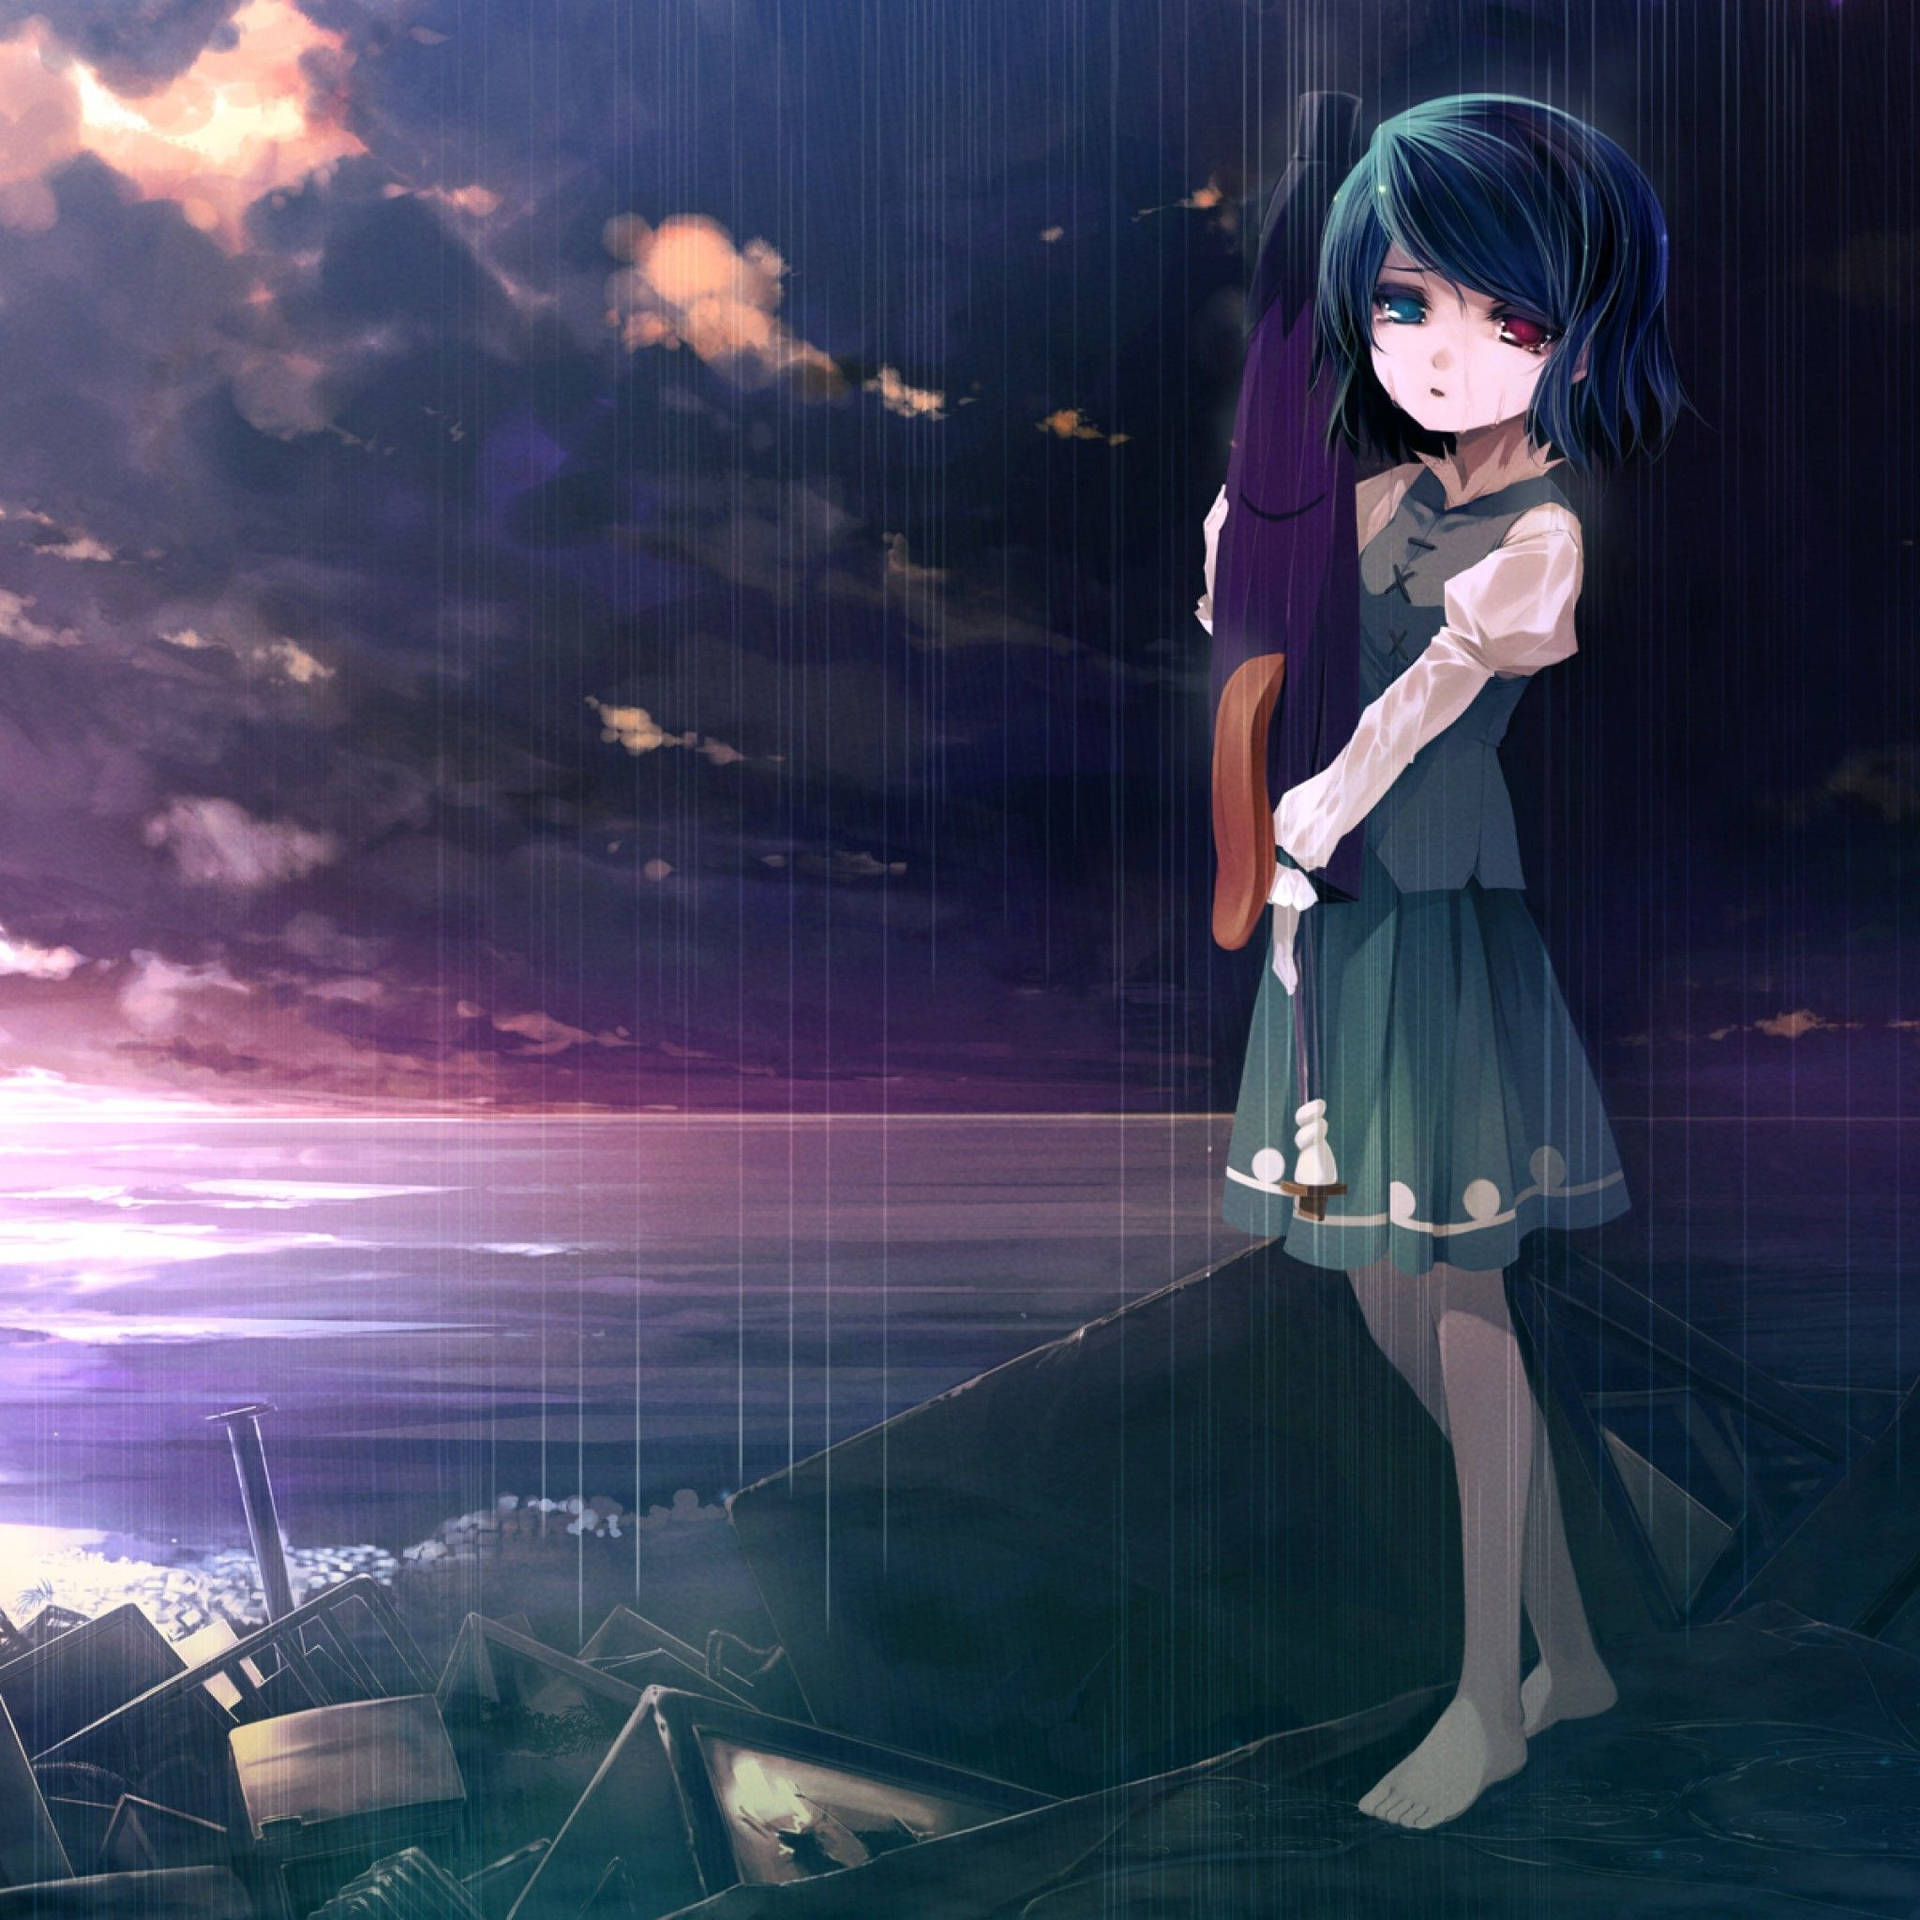 Anime Girl Sad Alone By The Ocean Wallpaper